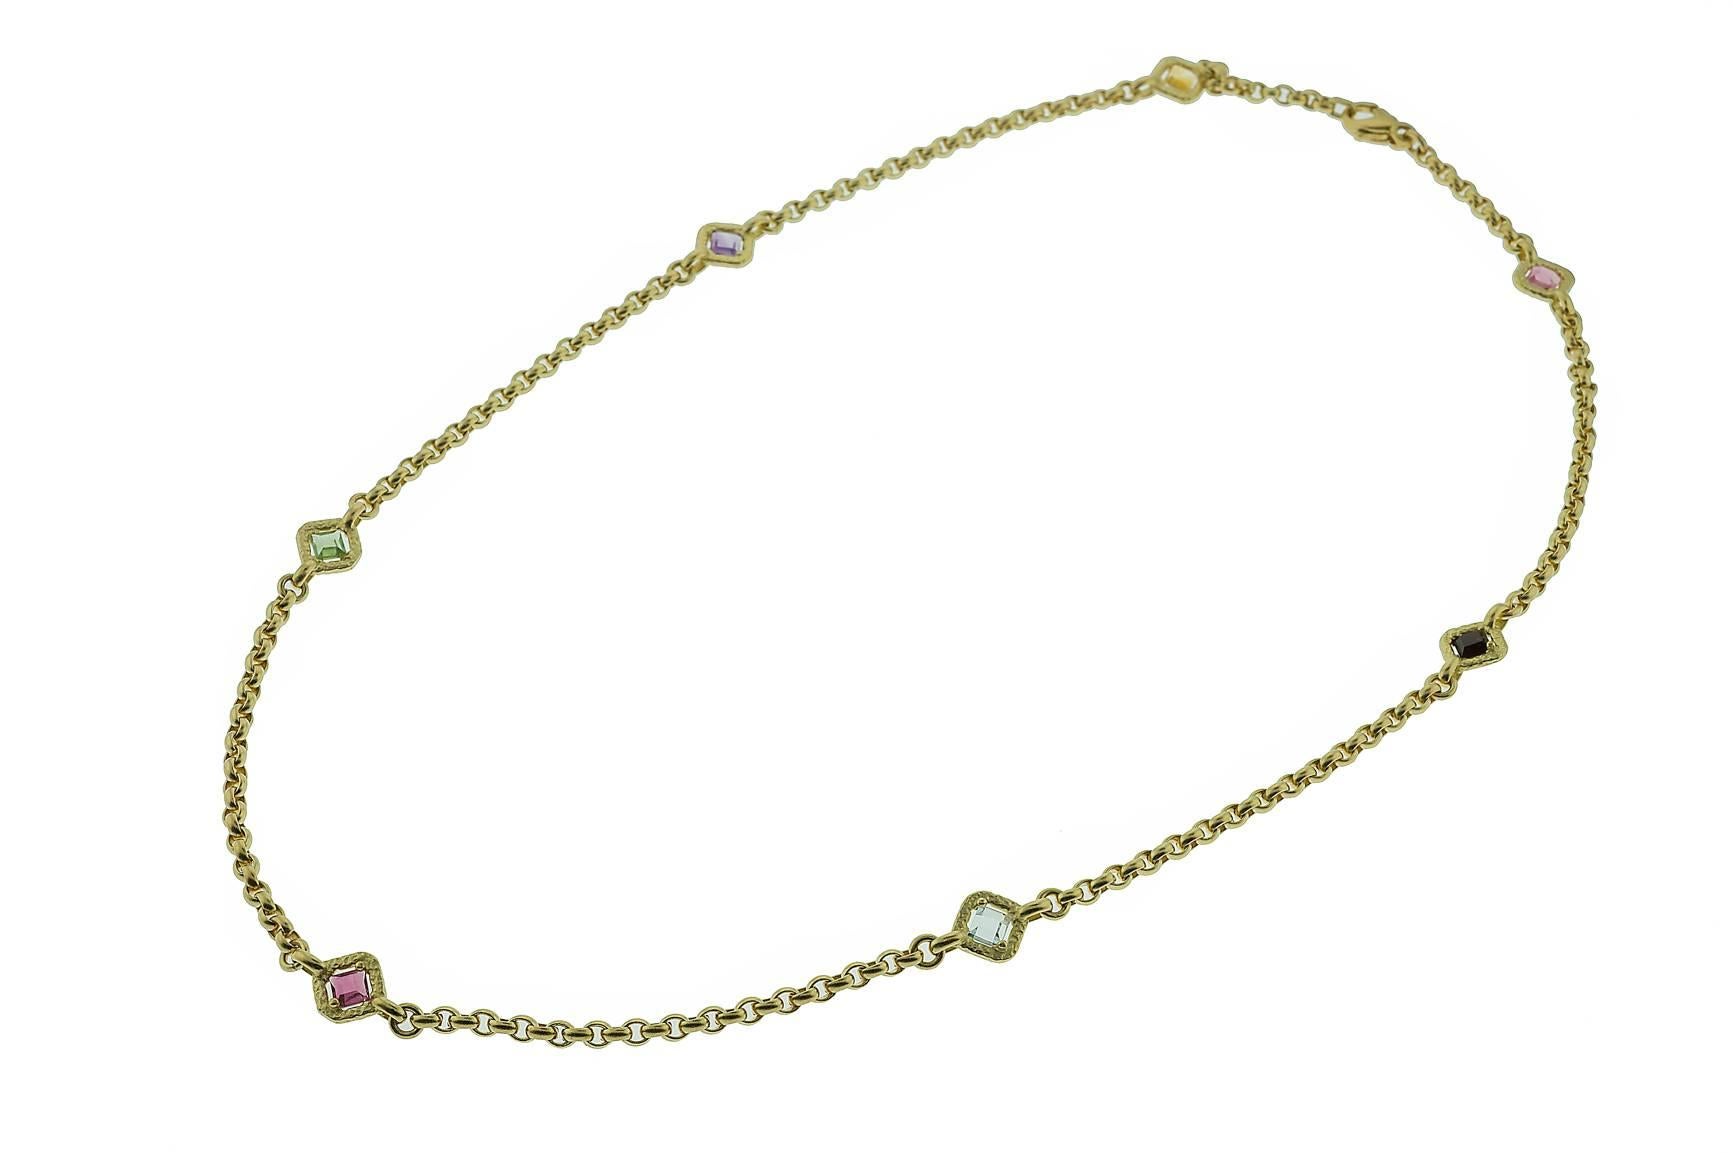 18K yellow gold brushed finish rolo chain with colored gem stations. 